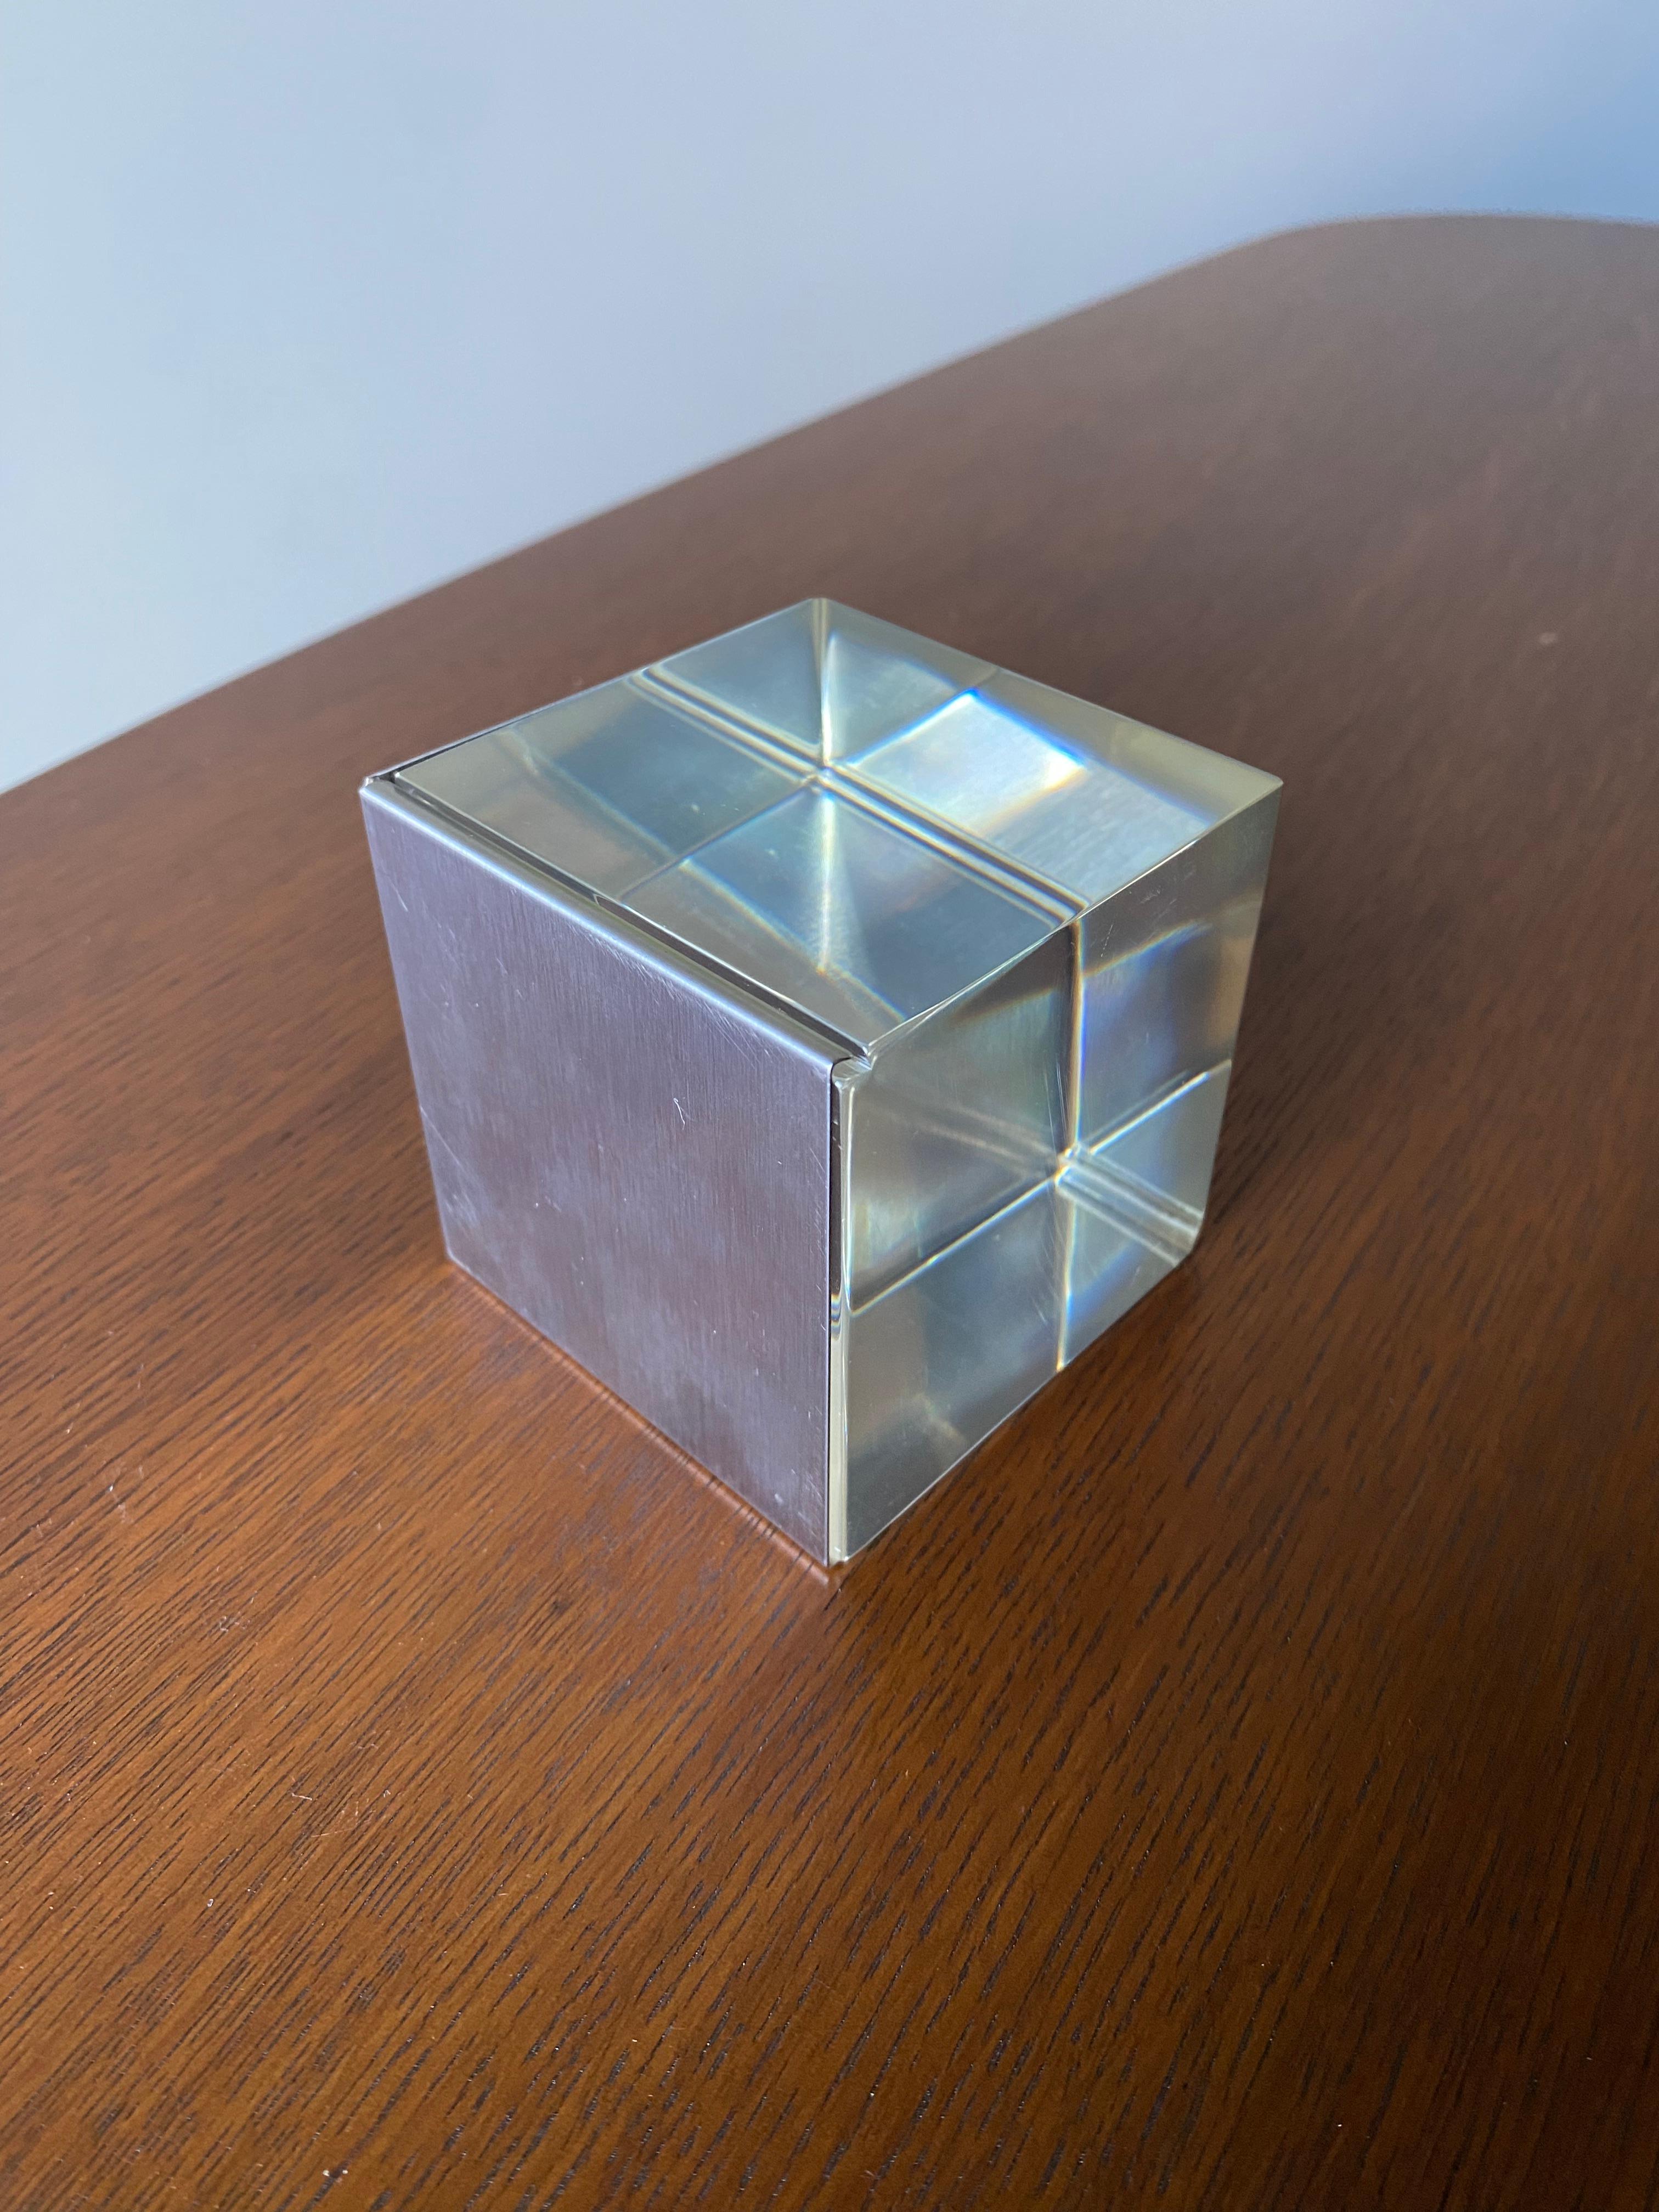 Lucite & Stainless Steel Cube Op Art Prism Photo Frame in the style of Bob Cornell, 20th Century.  This piece also works nicely as a sculpture or paper weight.  